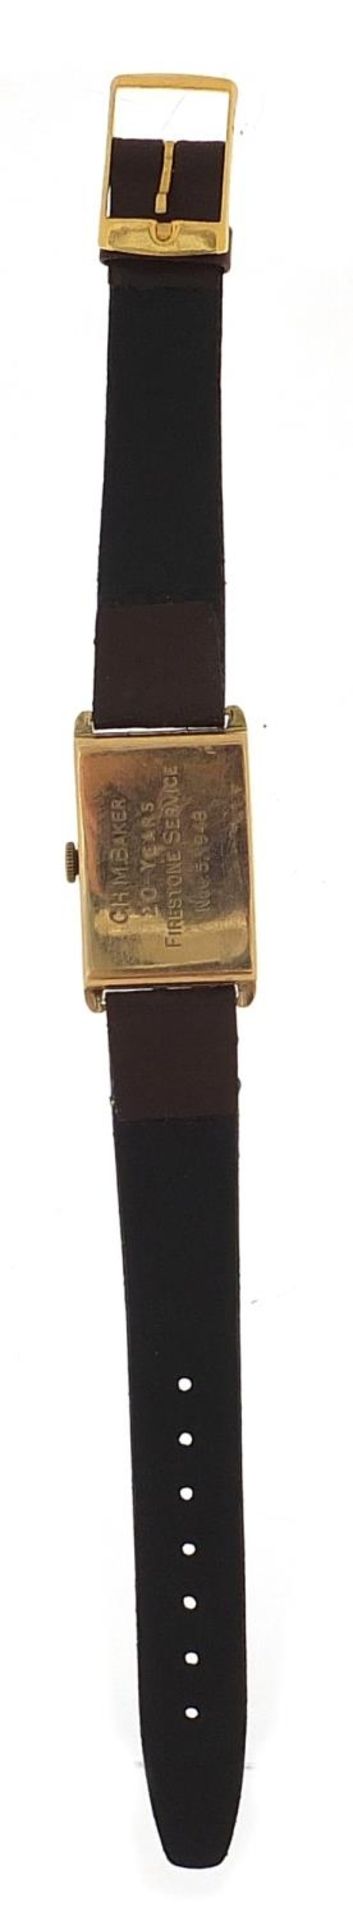 Tudor, vintage manual wristwatch with subsidiary dial, the case 22mm wide :For Further Condition - Image 4 of 5